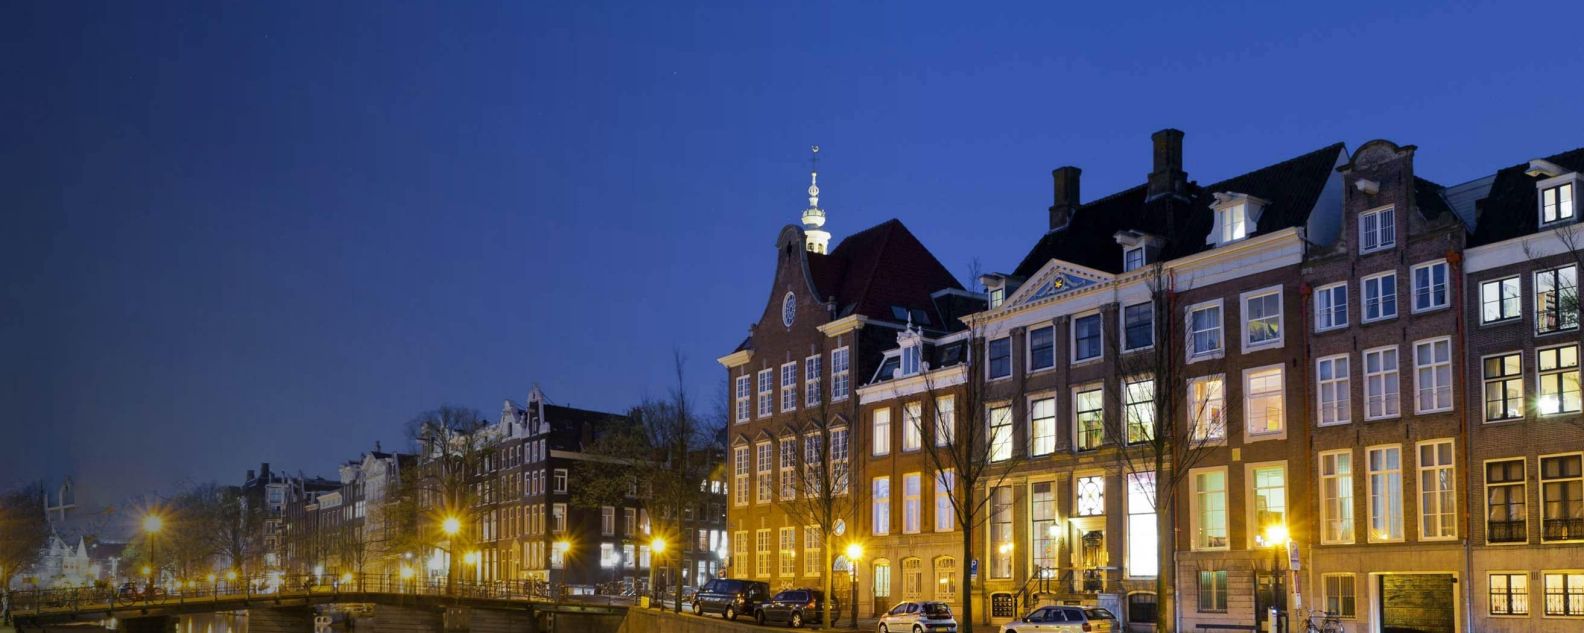 photo of traditional buildings in Amsterdam, Netherlands